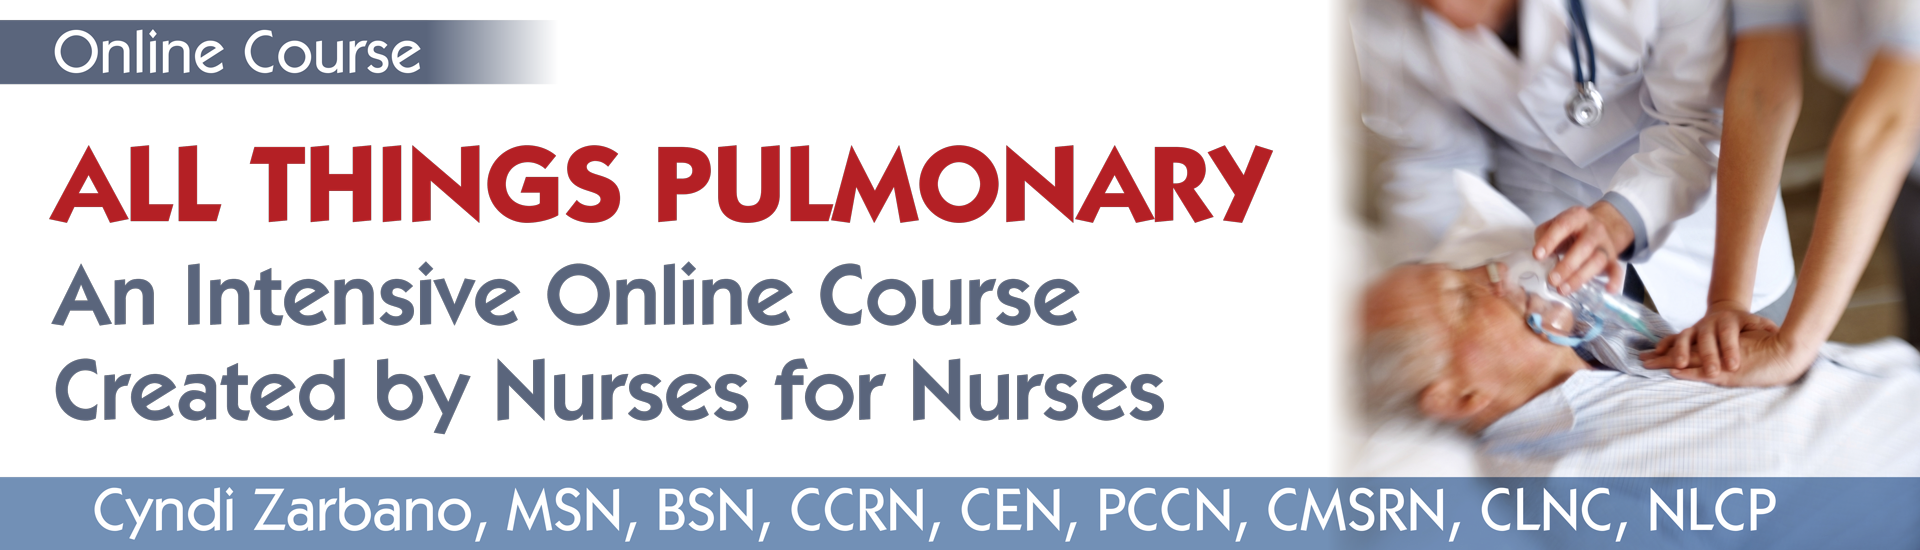 All Things Pulmonary Online Course